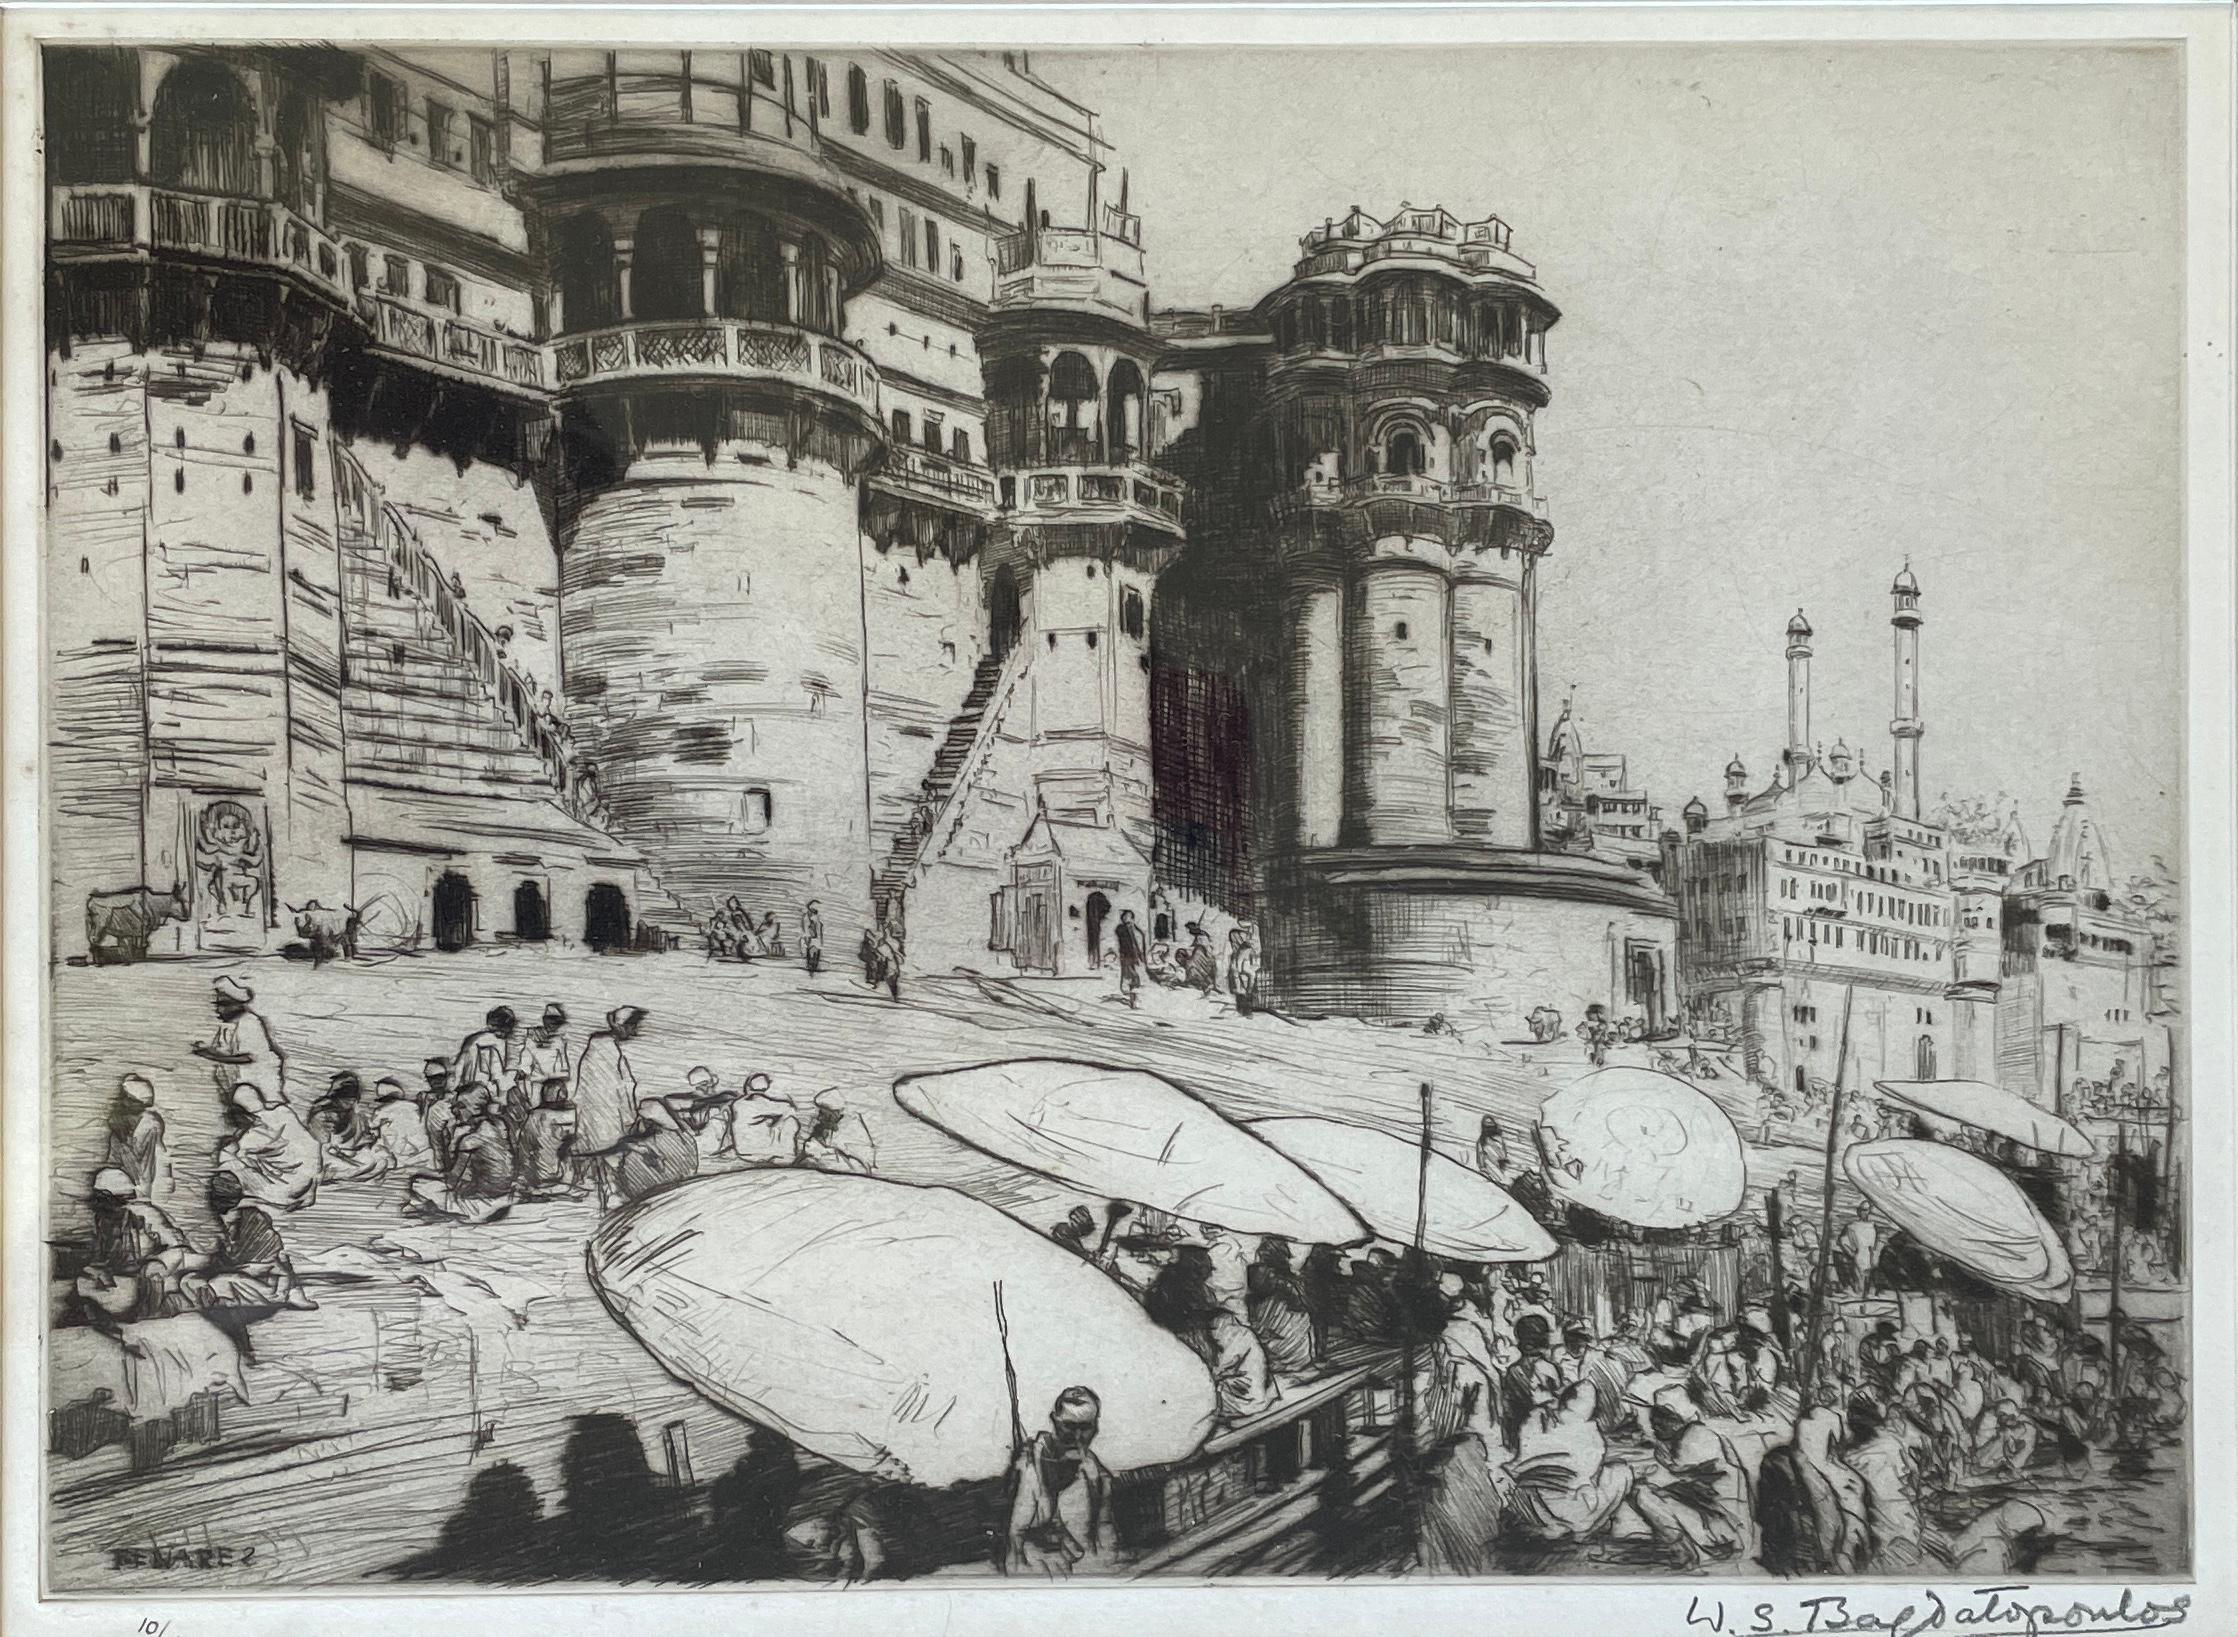 William Spencer Bagdatopoulos Landscape Print - Early 20th century Ltd Etching Indian Listed Art Benares Varanasi Ganges India 